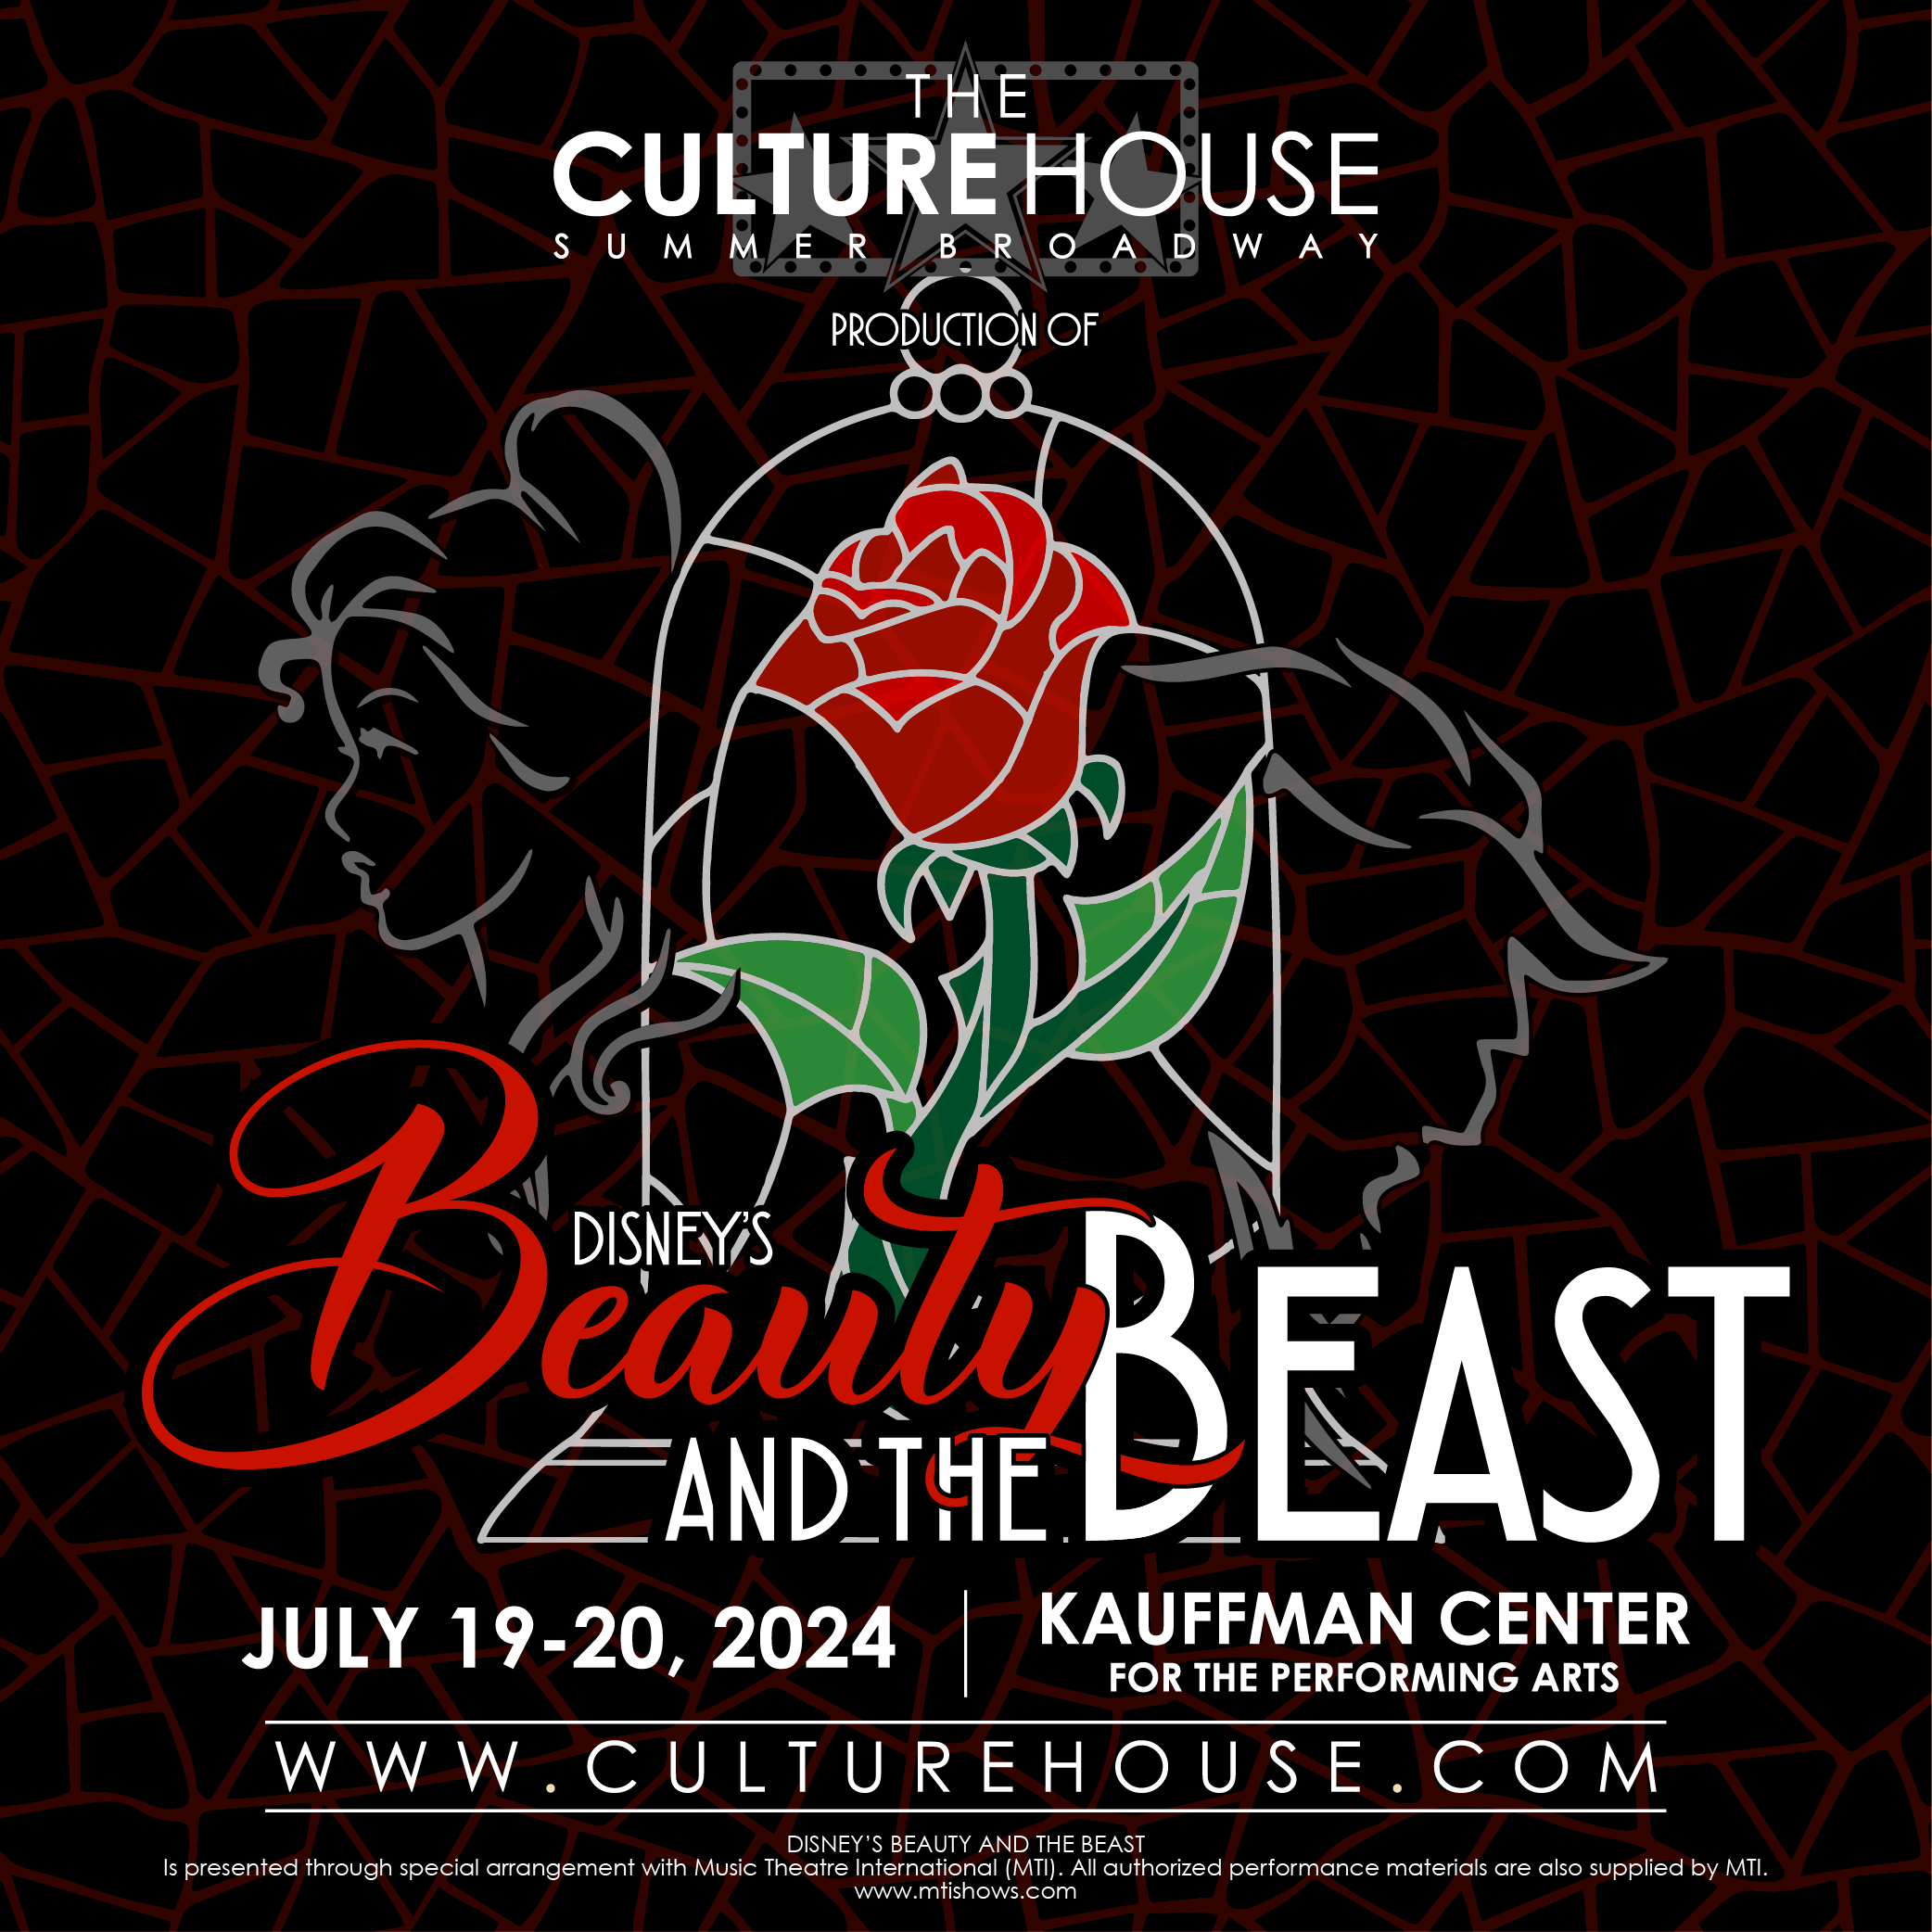 <em>The Culture House Summer Broadway Series Presents</em><br>

Disney's Beauty and the Beast